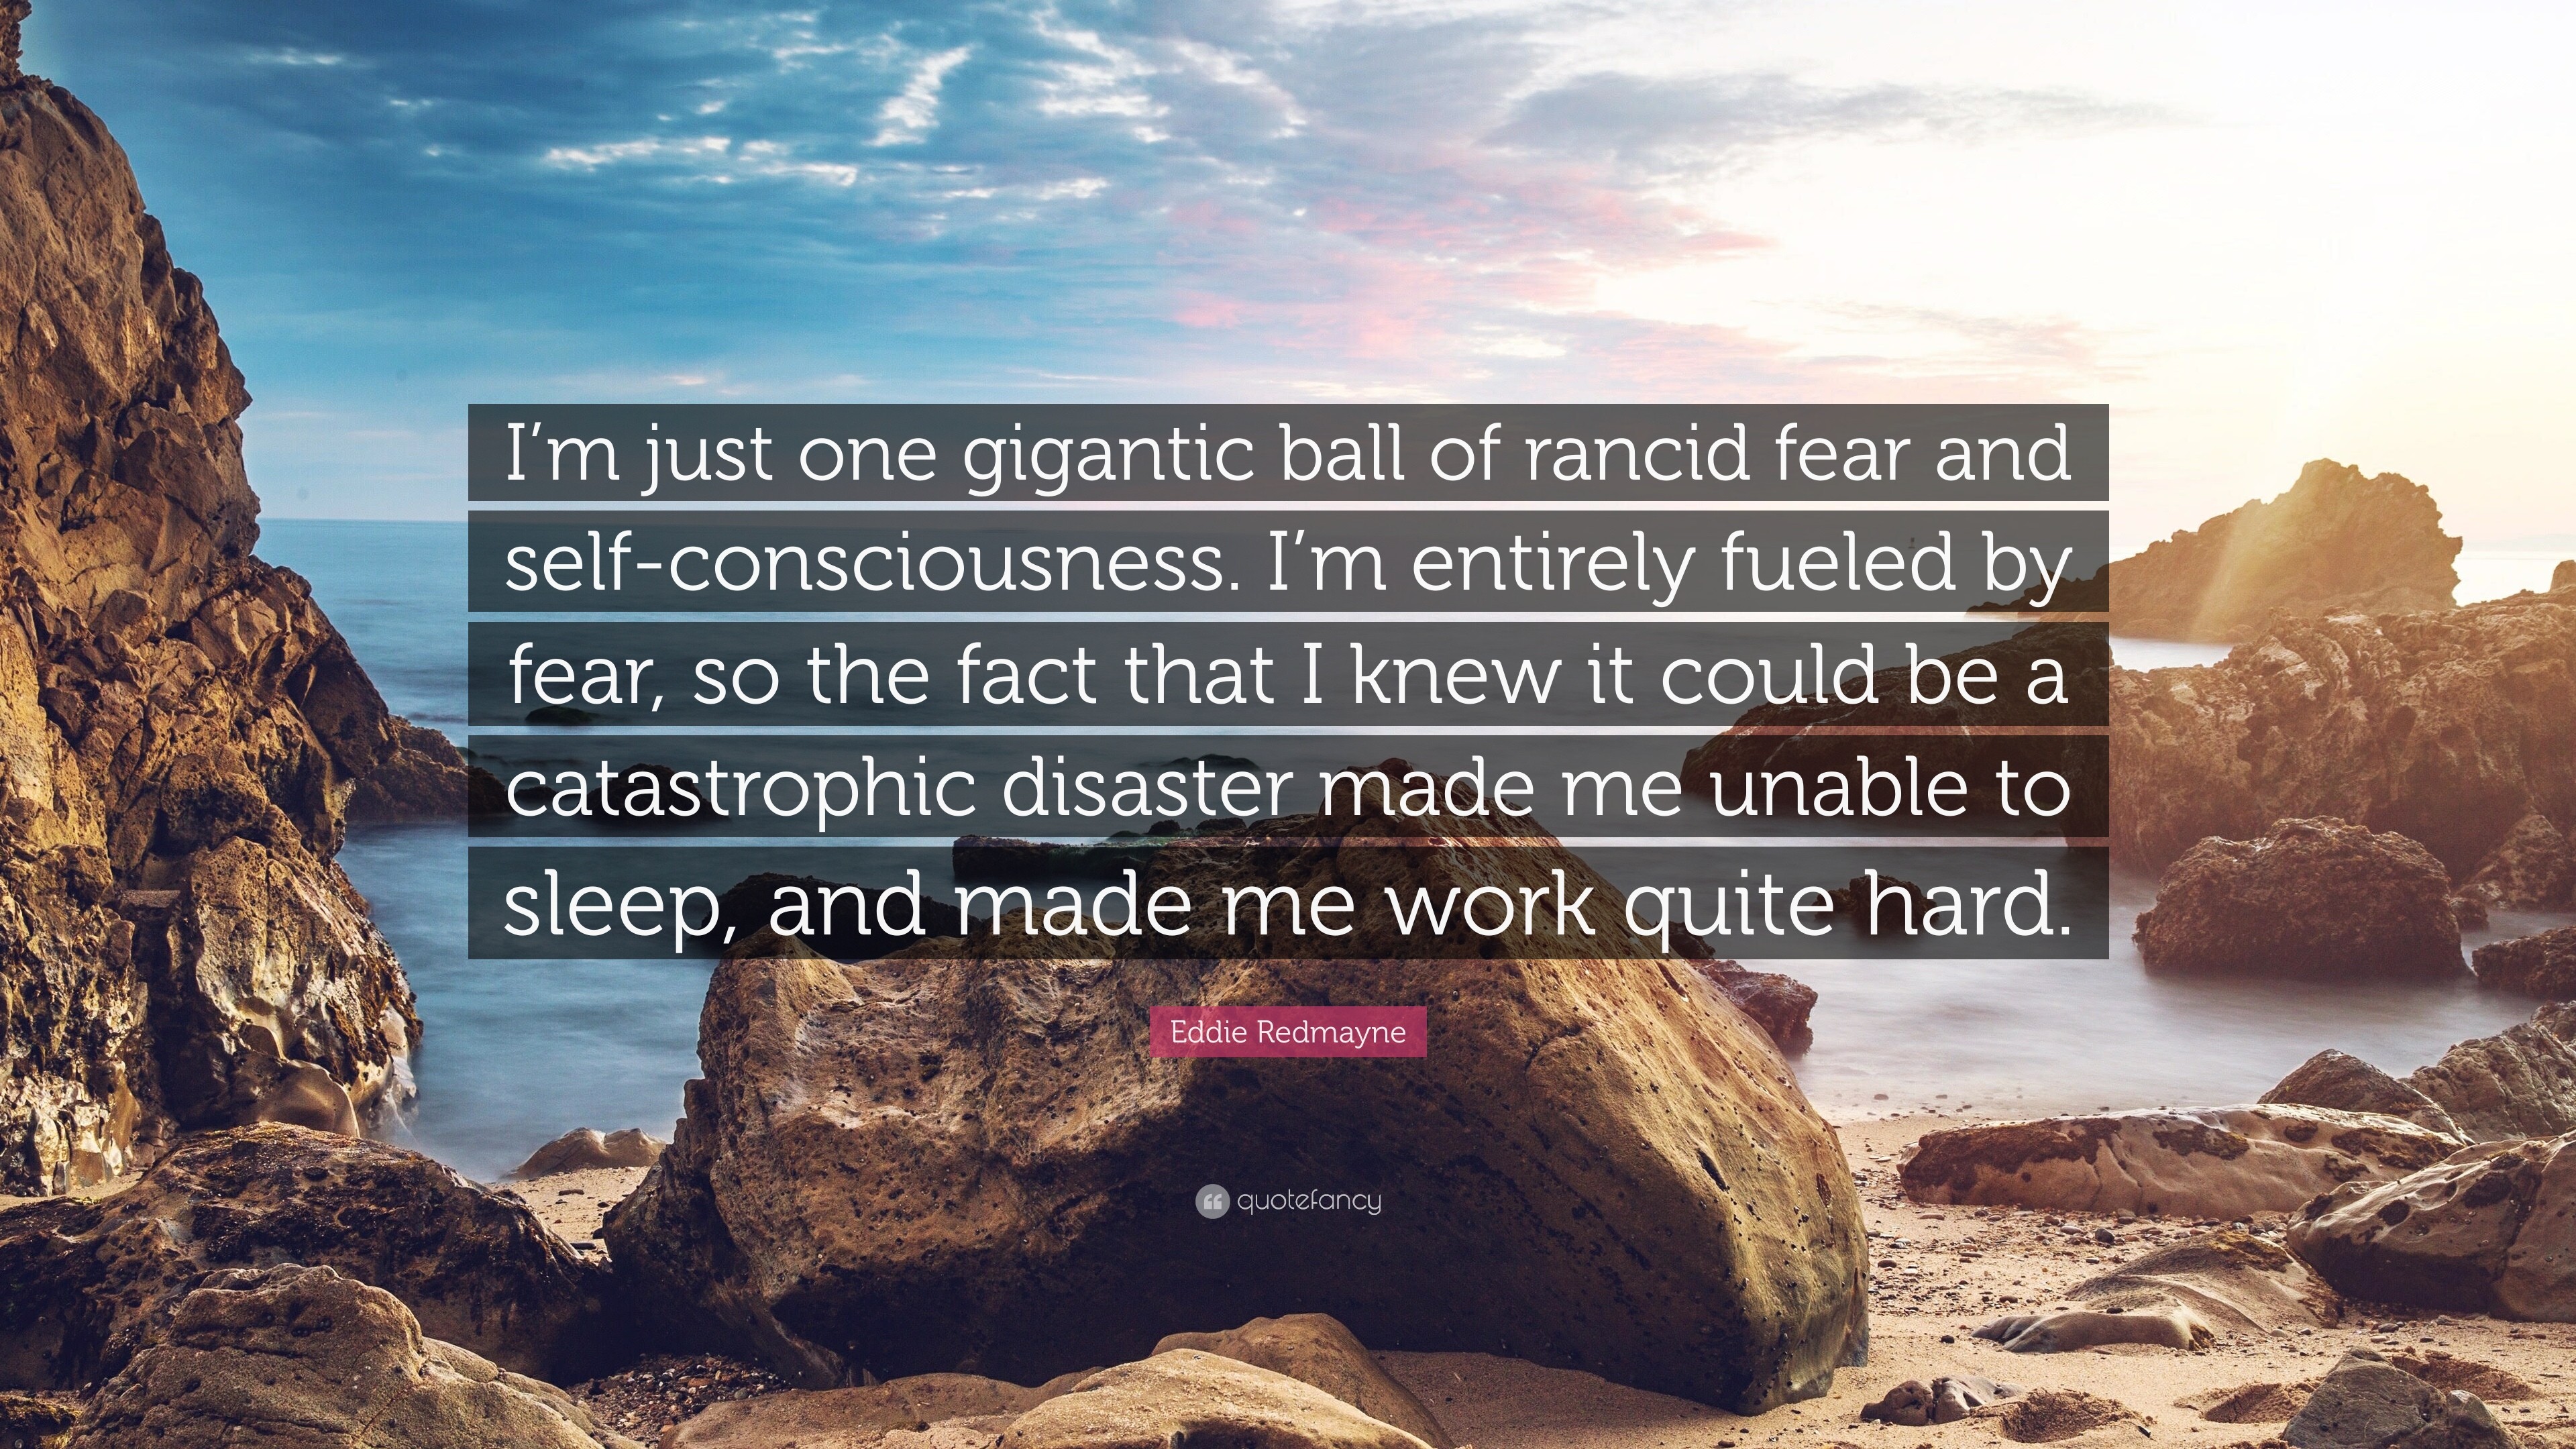 3840x2160 Eddie Redmayne Quote: “I'm just one gigantic ball of rancid fear and